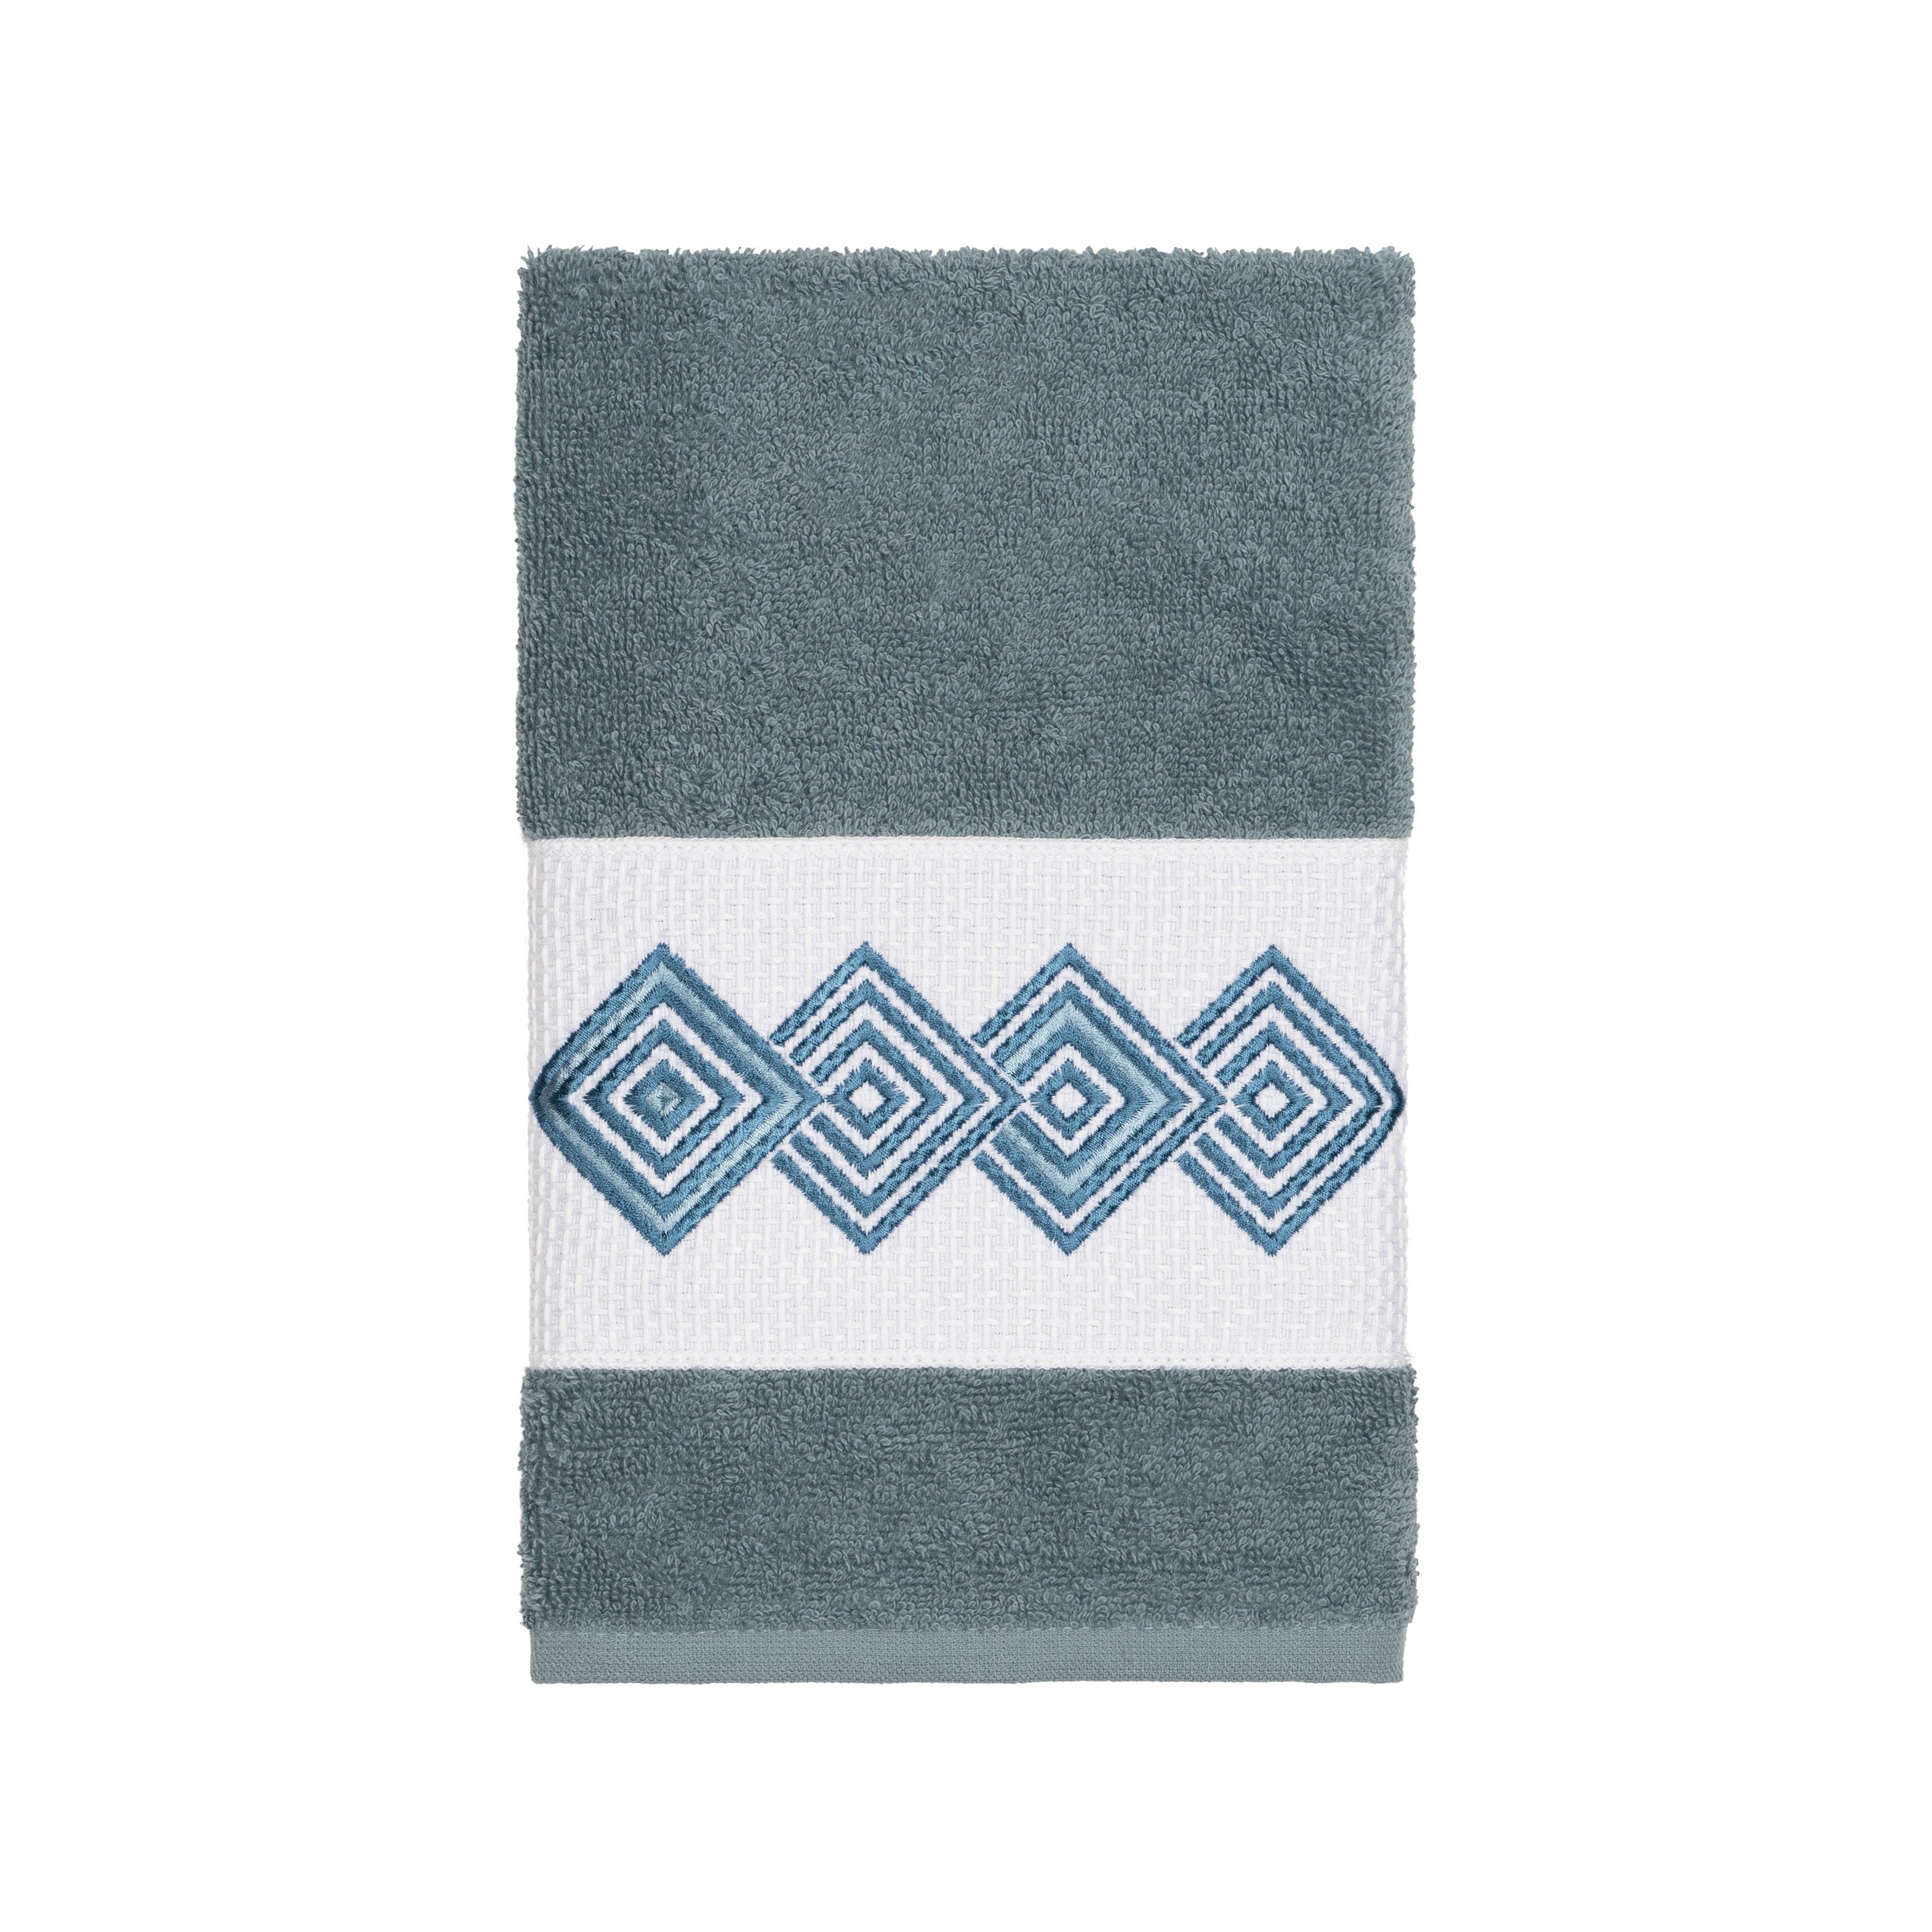 Embroidered Teal Blue Hand Towel 